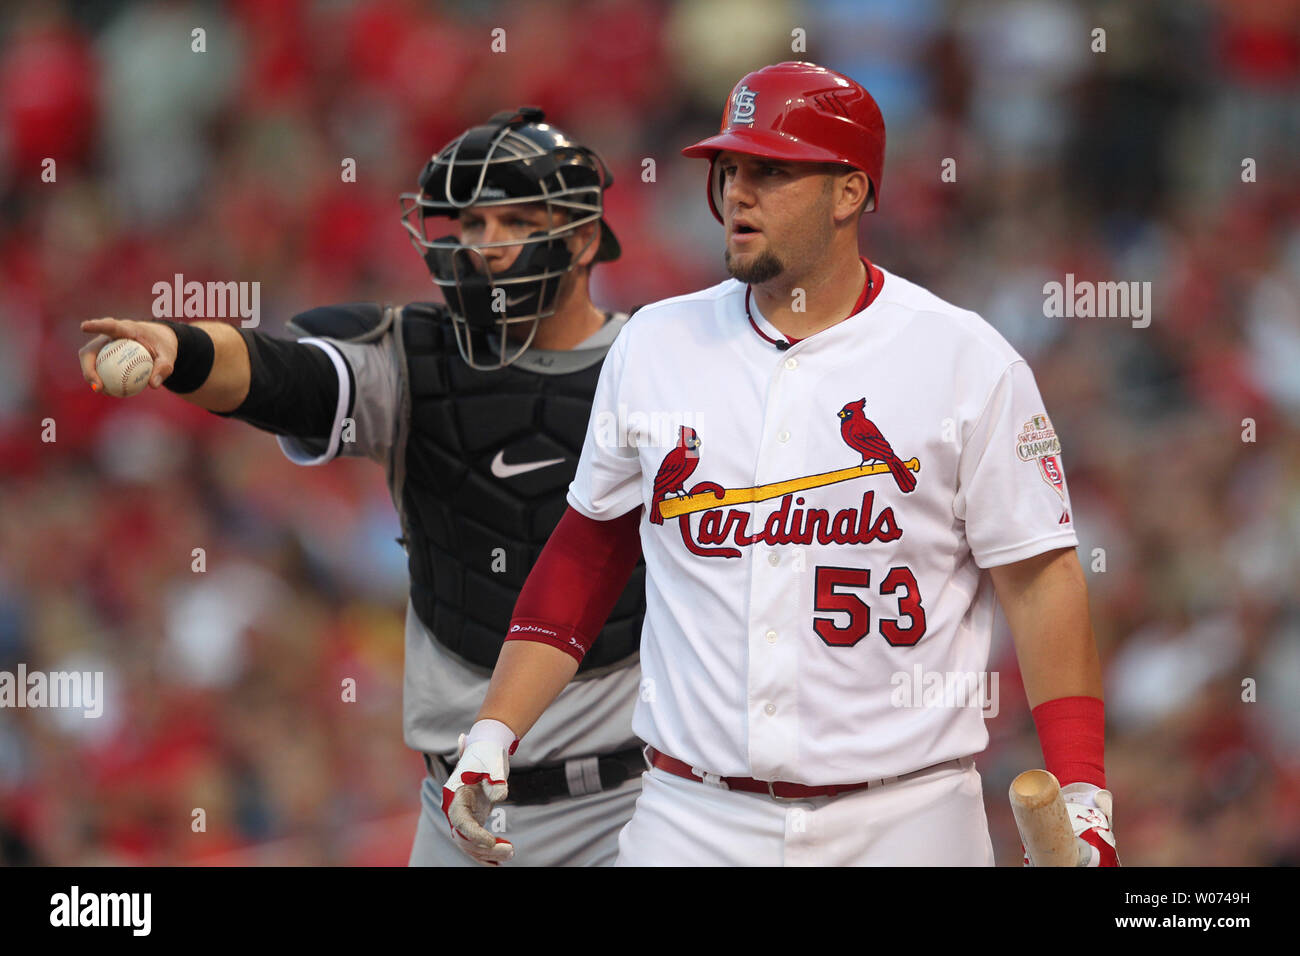 Chicago White Sox catcheer A.J. Pierzynski points to third base umpire Chris Guccione for the call as St. Louis Cardinals batter Matt Adams strikes out in the second inning at Busch Stadium in St. Louis on June 14, 2012. UPI/Bill Greenblatt Stock Photo